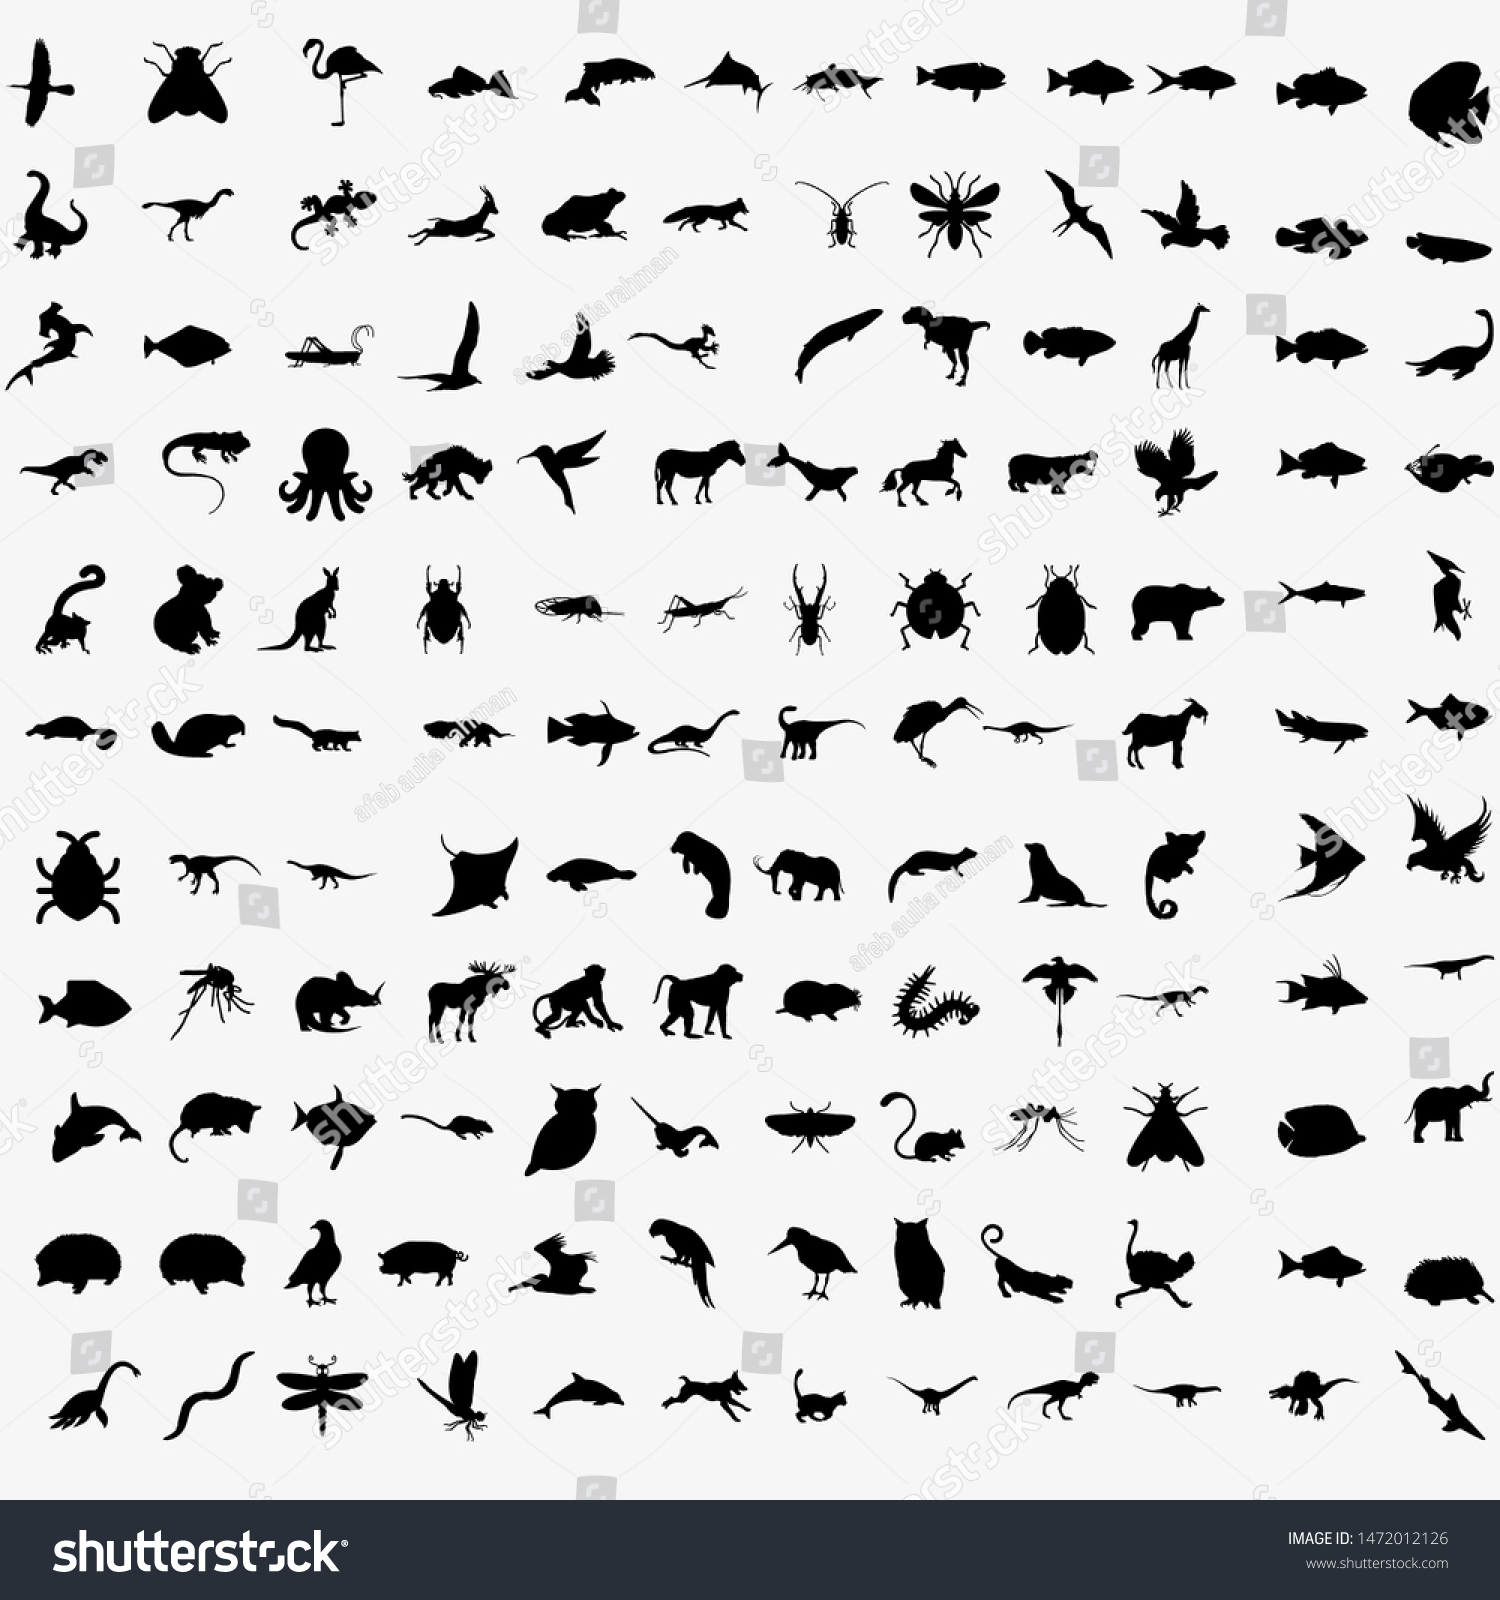 SVG of Vector Big Set of Animals Silhouettes. Mammals, Reptiles, Amphibia, Birds, Bats and other. svg